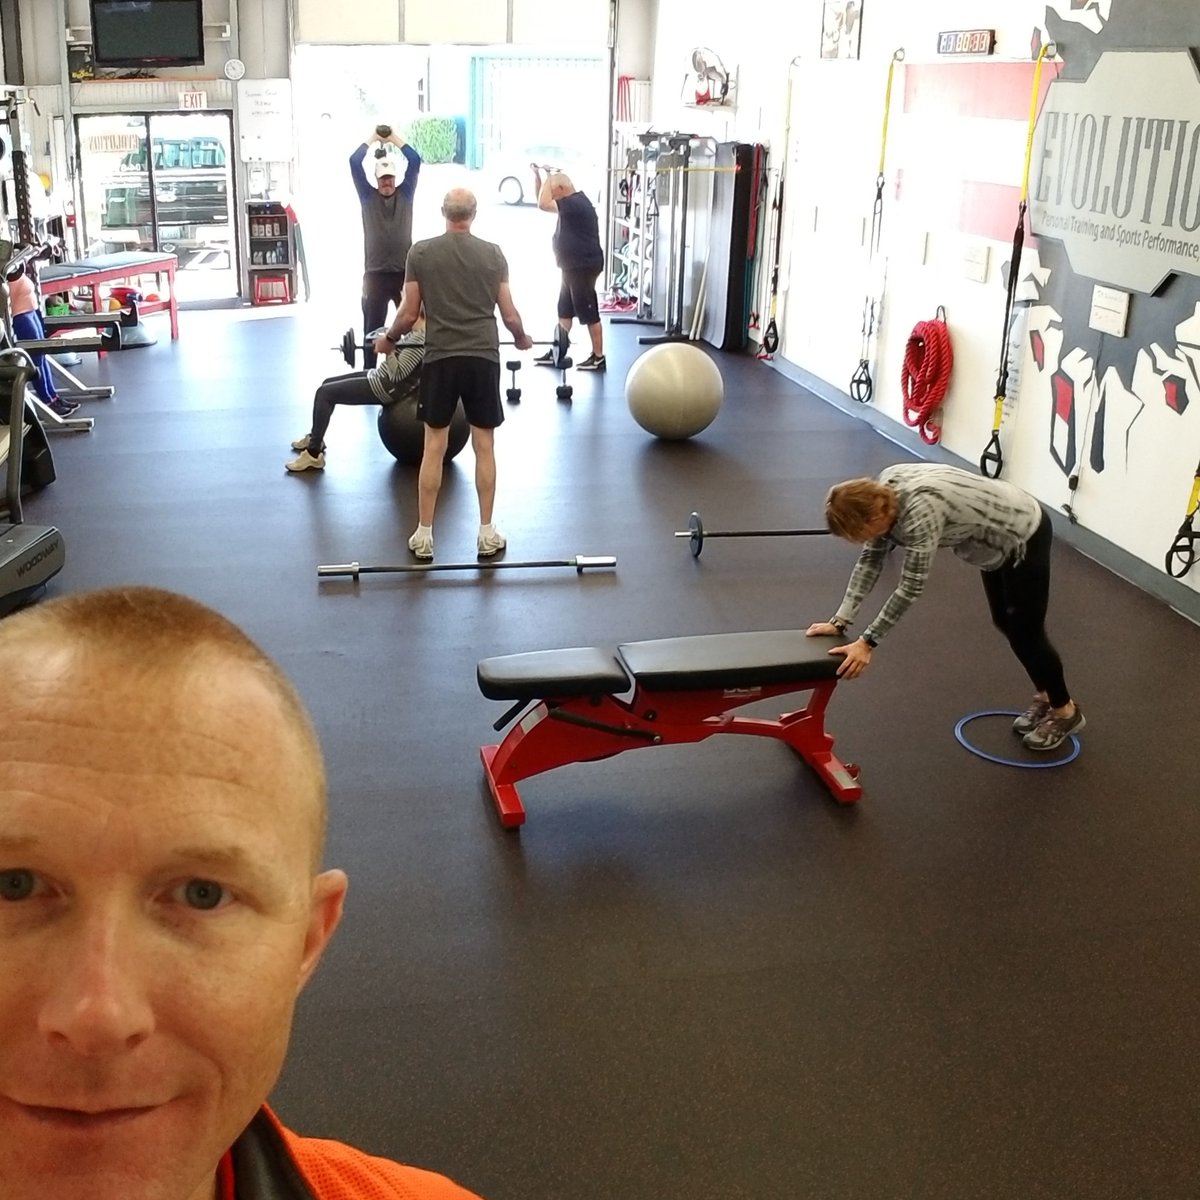 Full House!  Working hard and loving the Spring weather! #evolvewithshane #fitfriday #fitness #fitfam #sweatitout #sweat #strongertoday #personaltrainer #pt #atc #flexfriday #flexibility